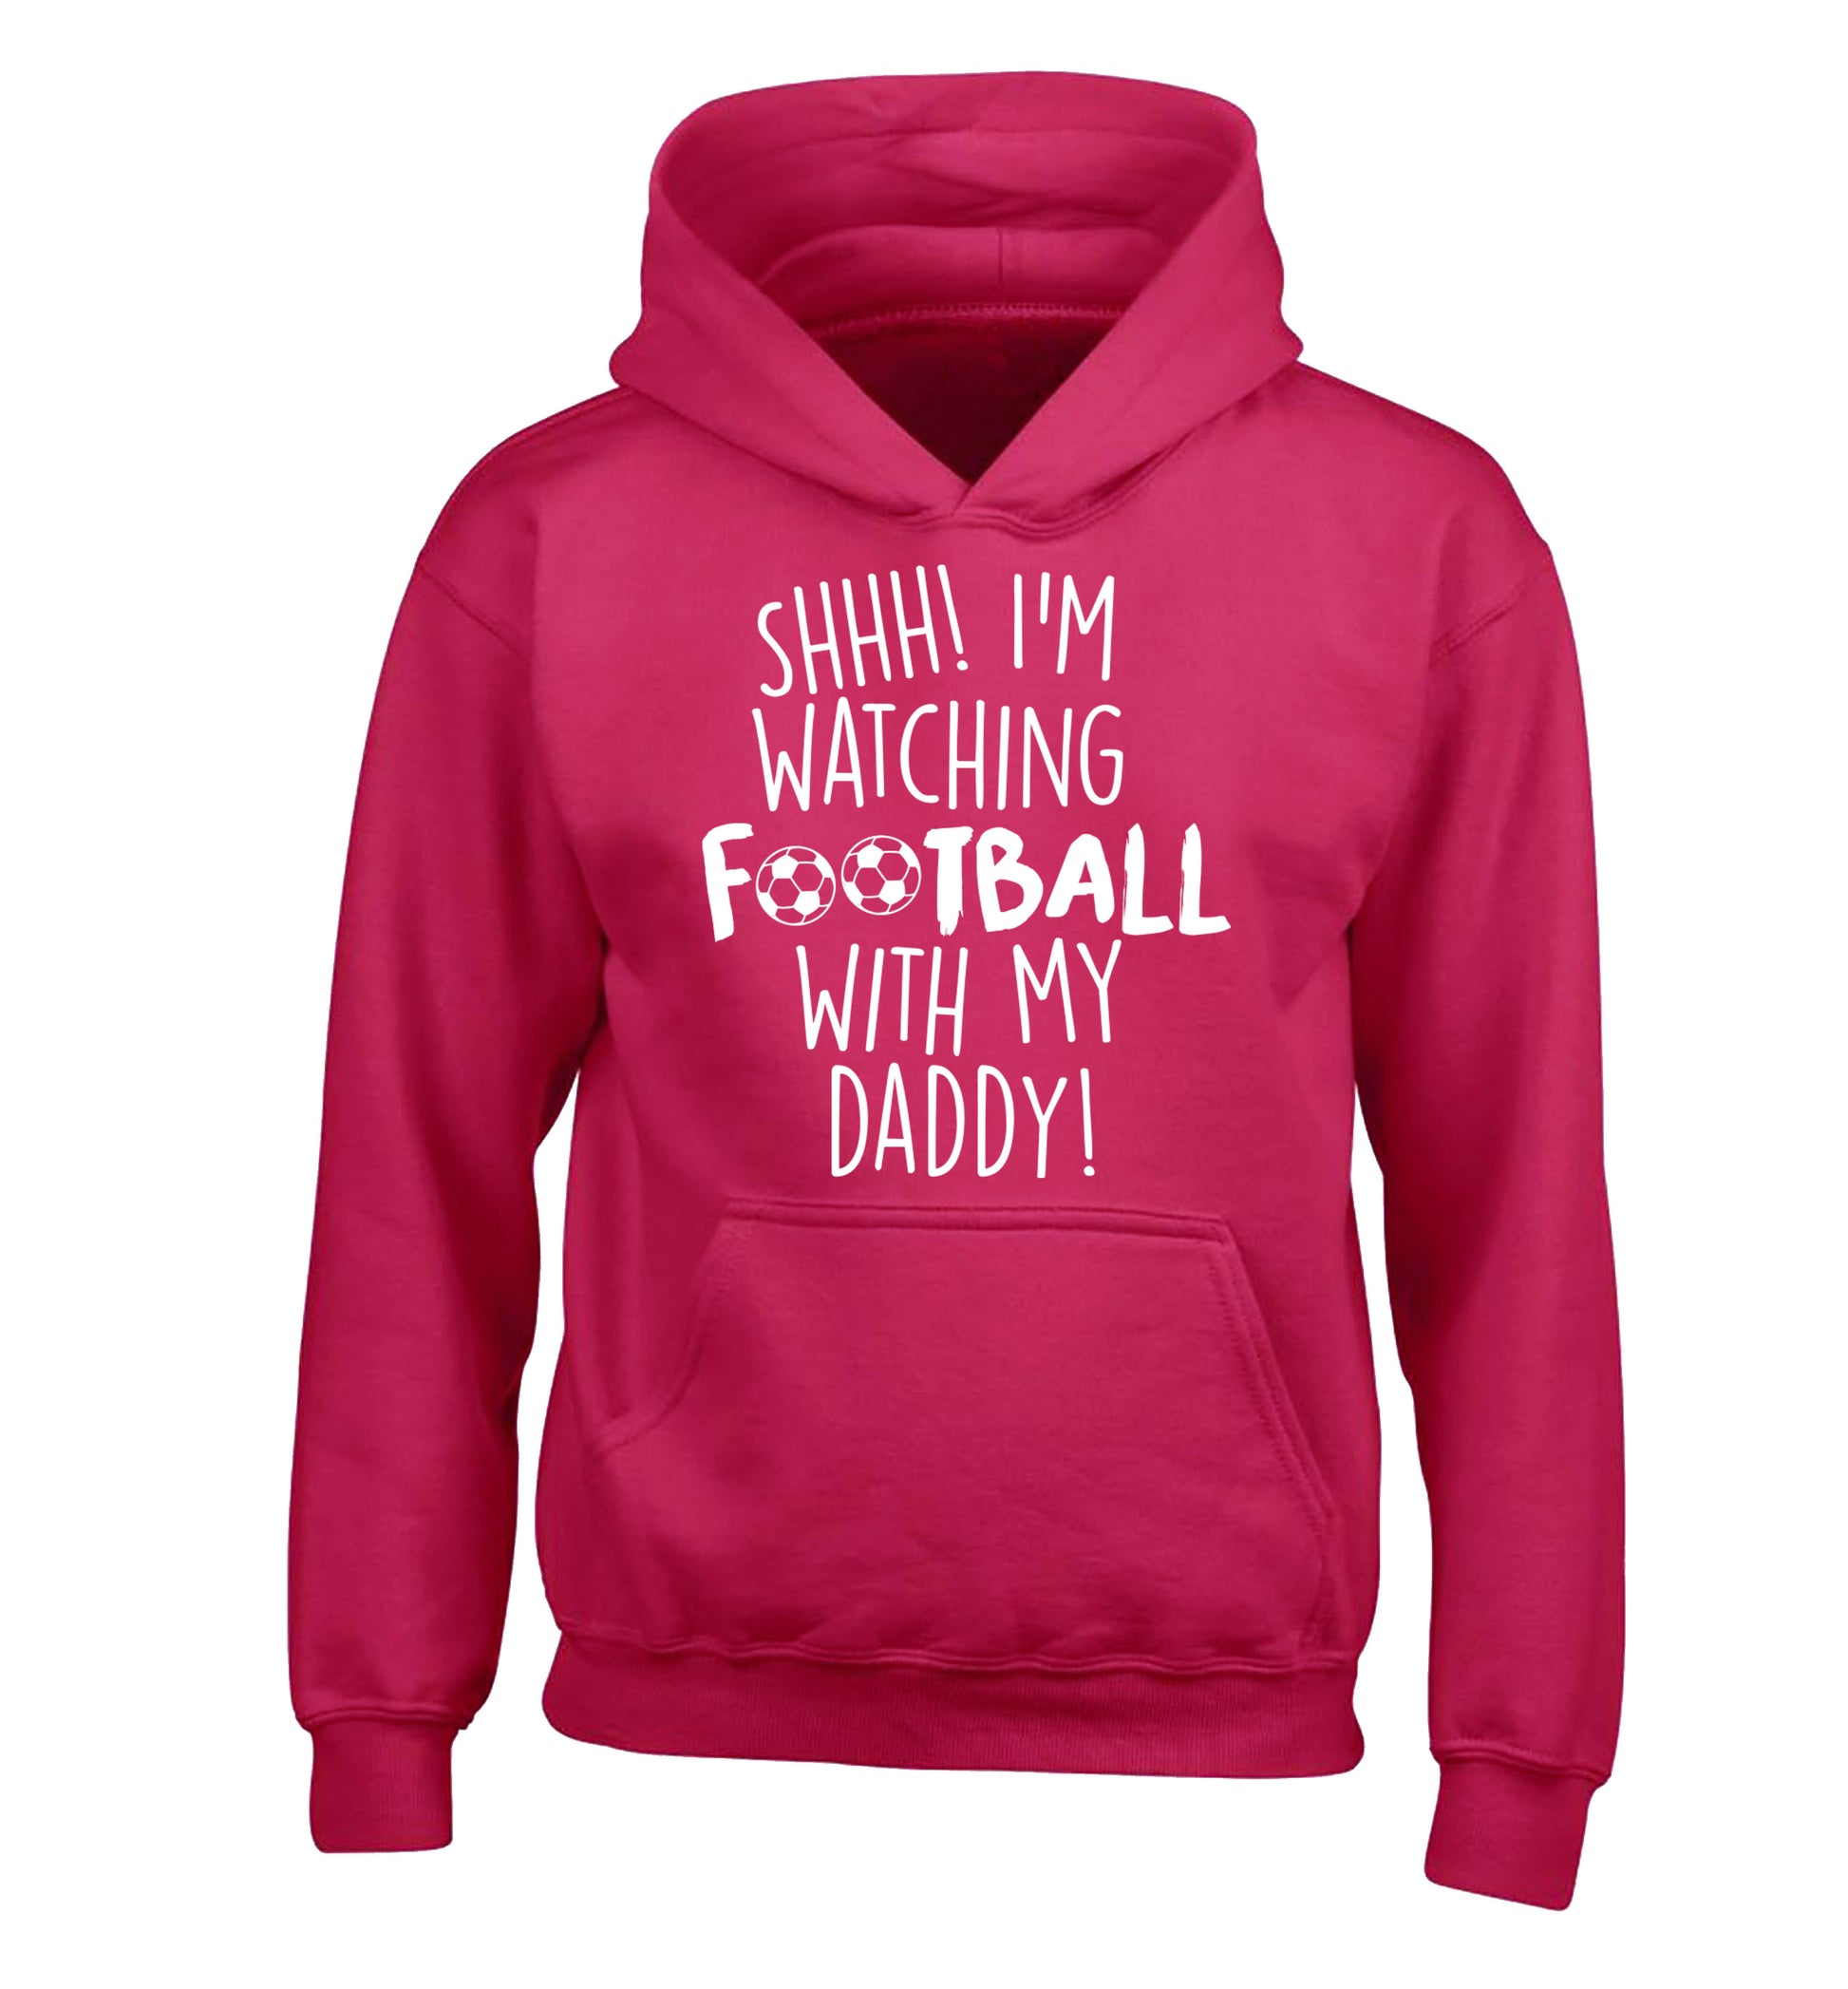 Shhh I'm watching football with my daddy children's pink hoodie 12-14 Years